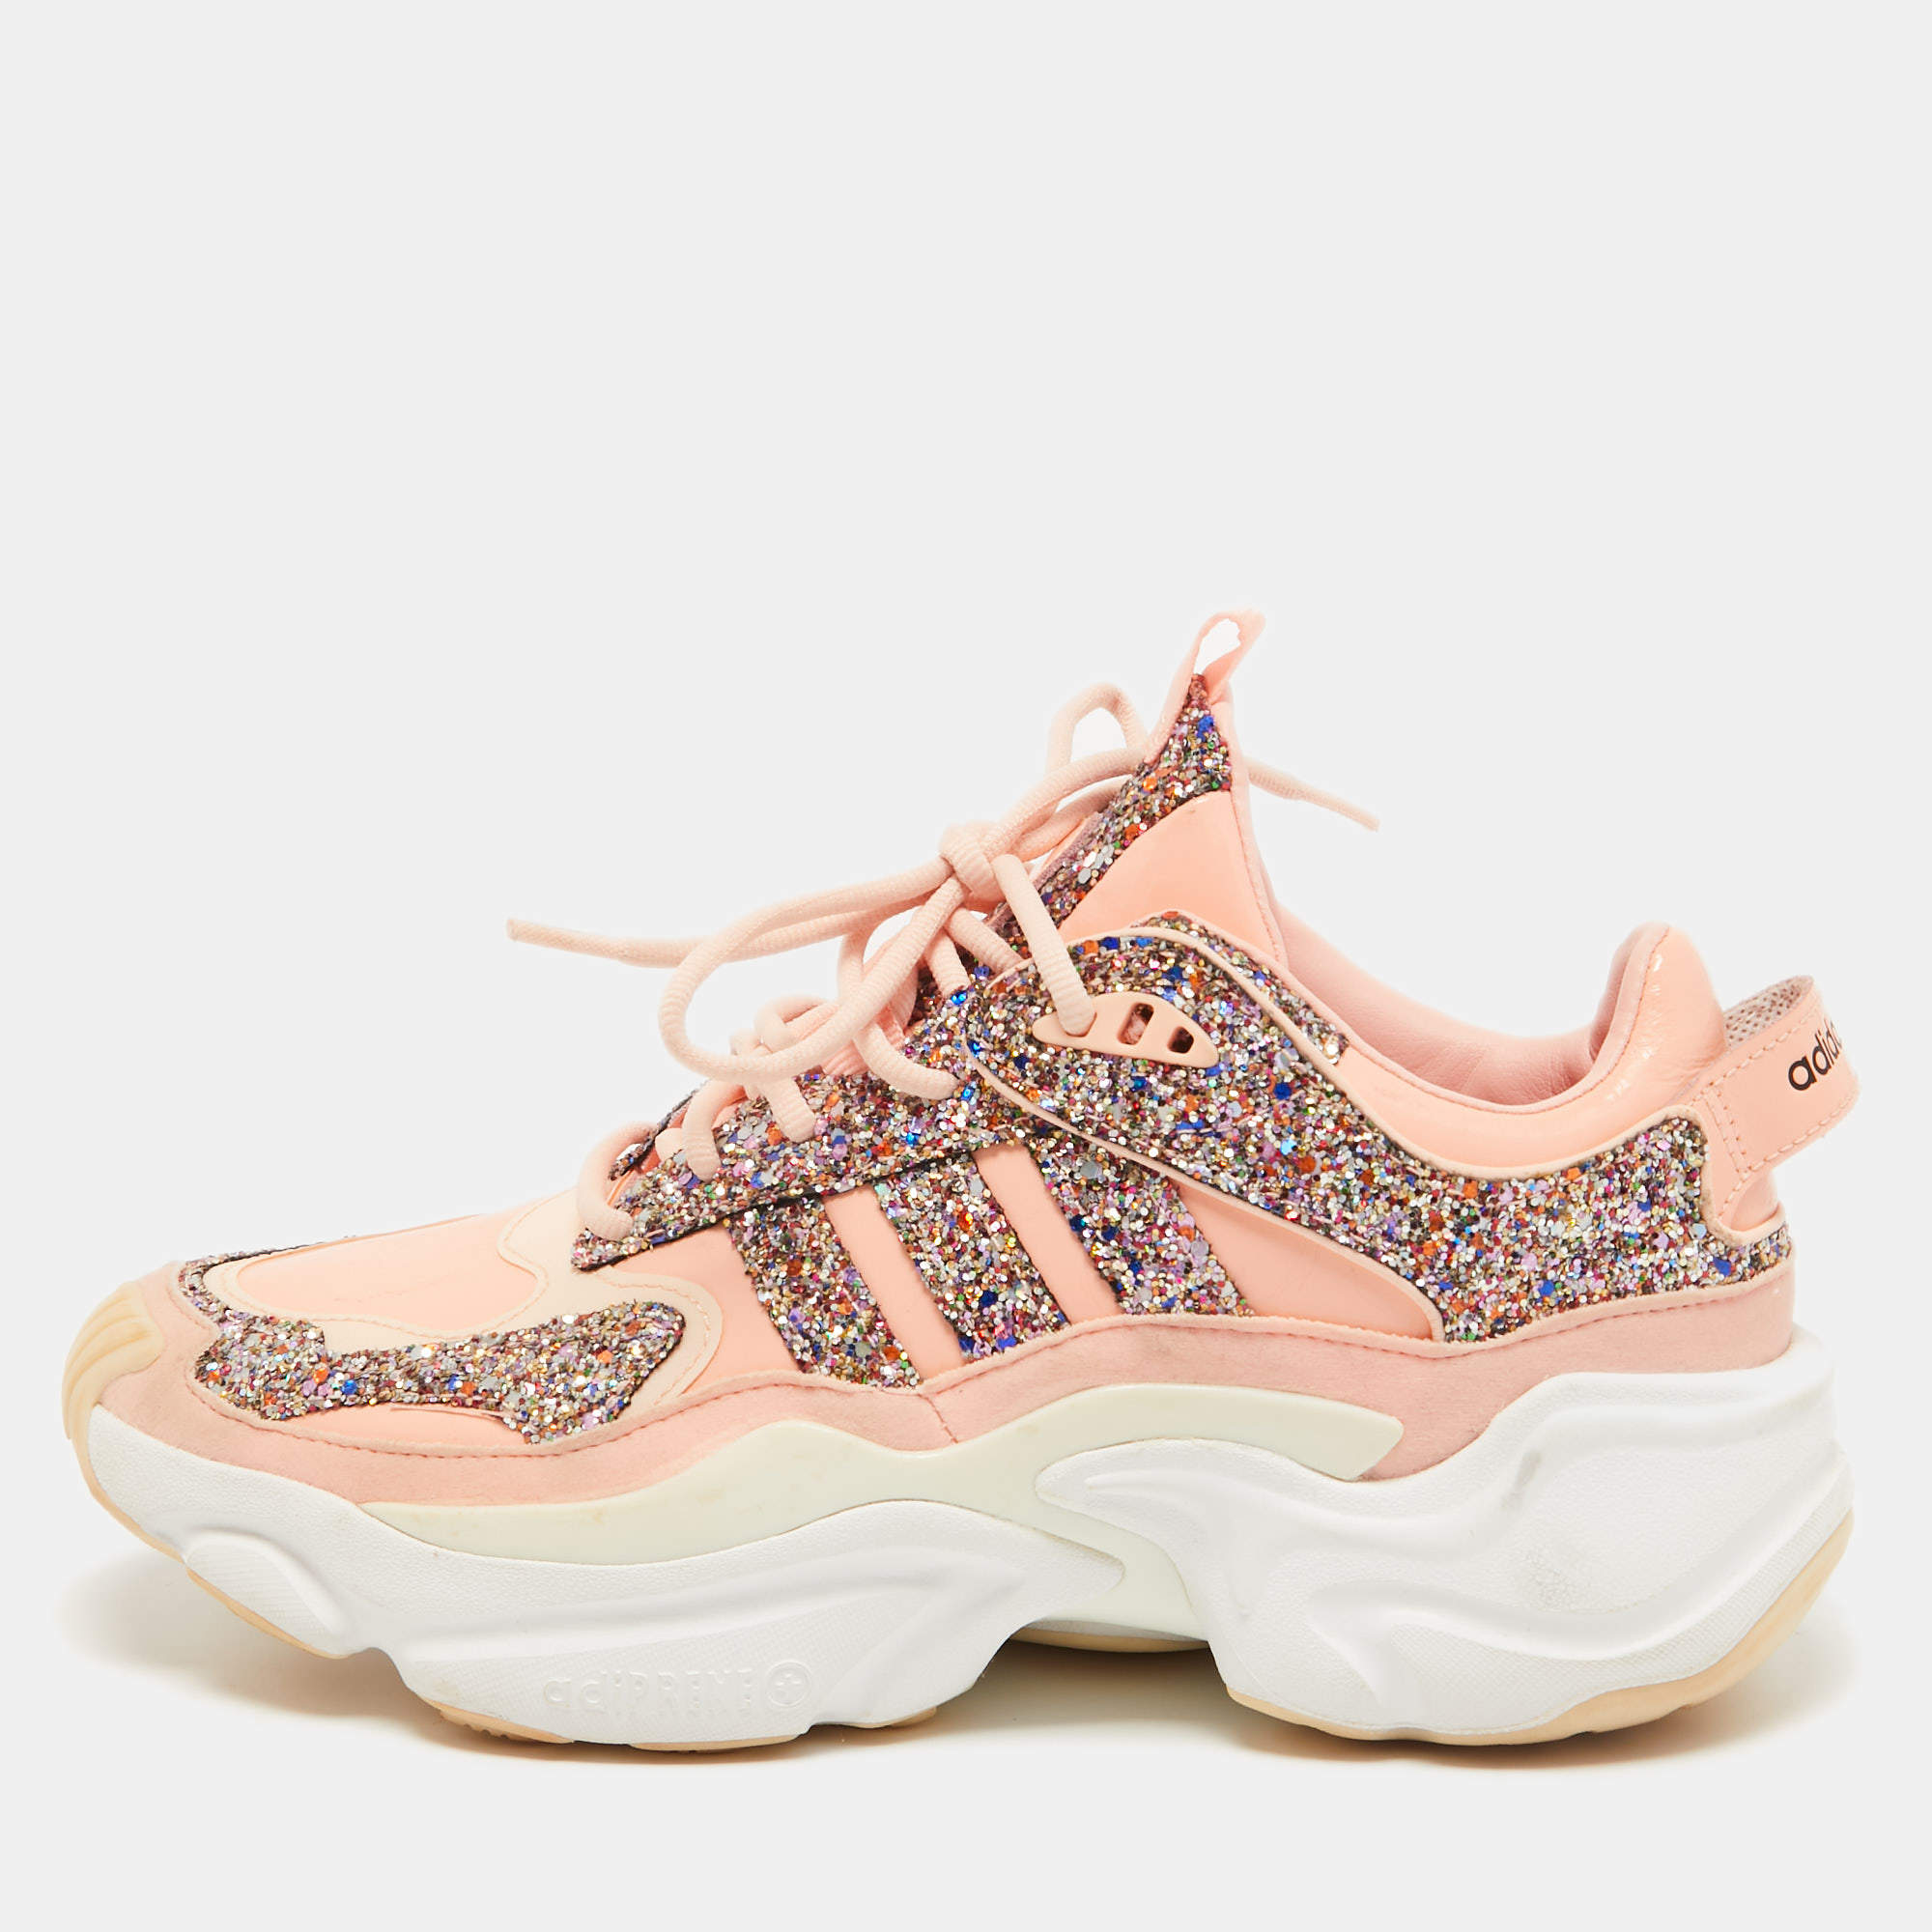 Adidas Pink Patent and Glitter Runner Size 41 1/3 Adidas | TLC